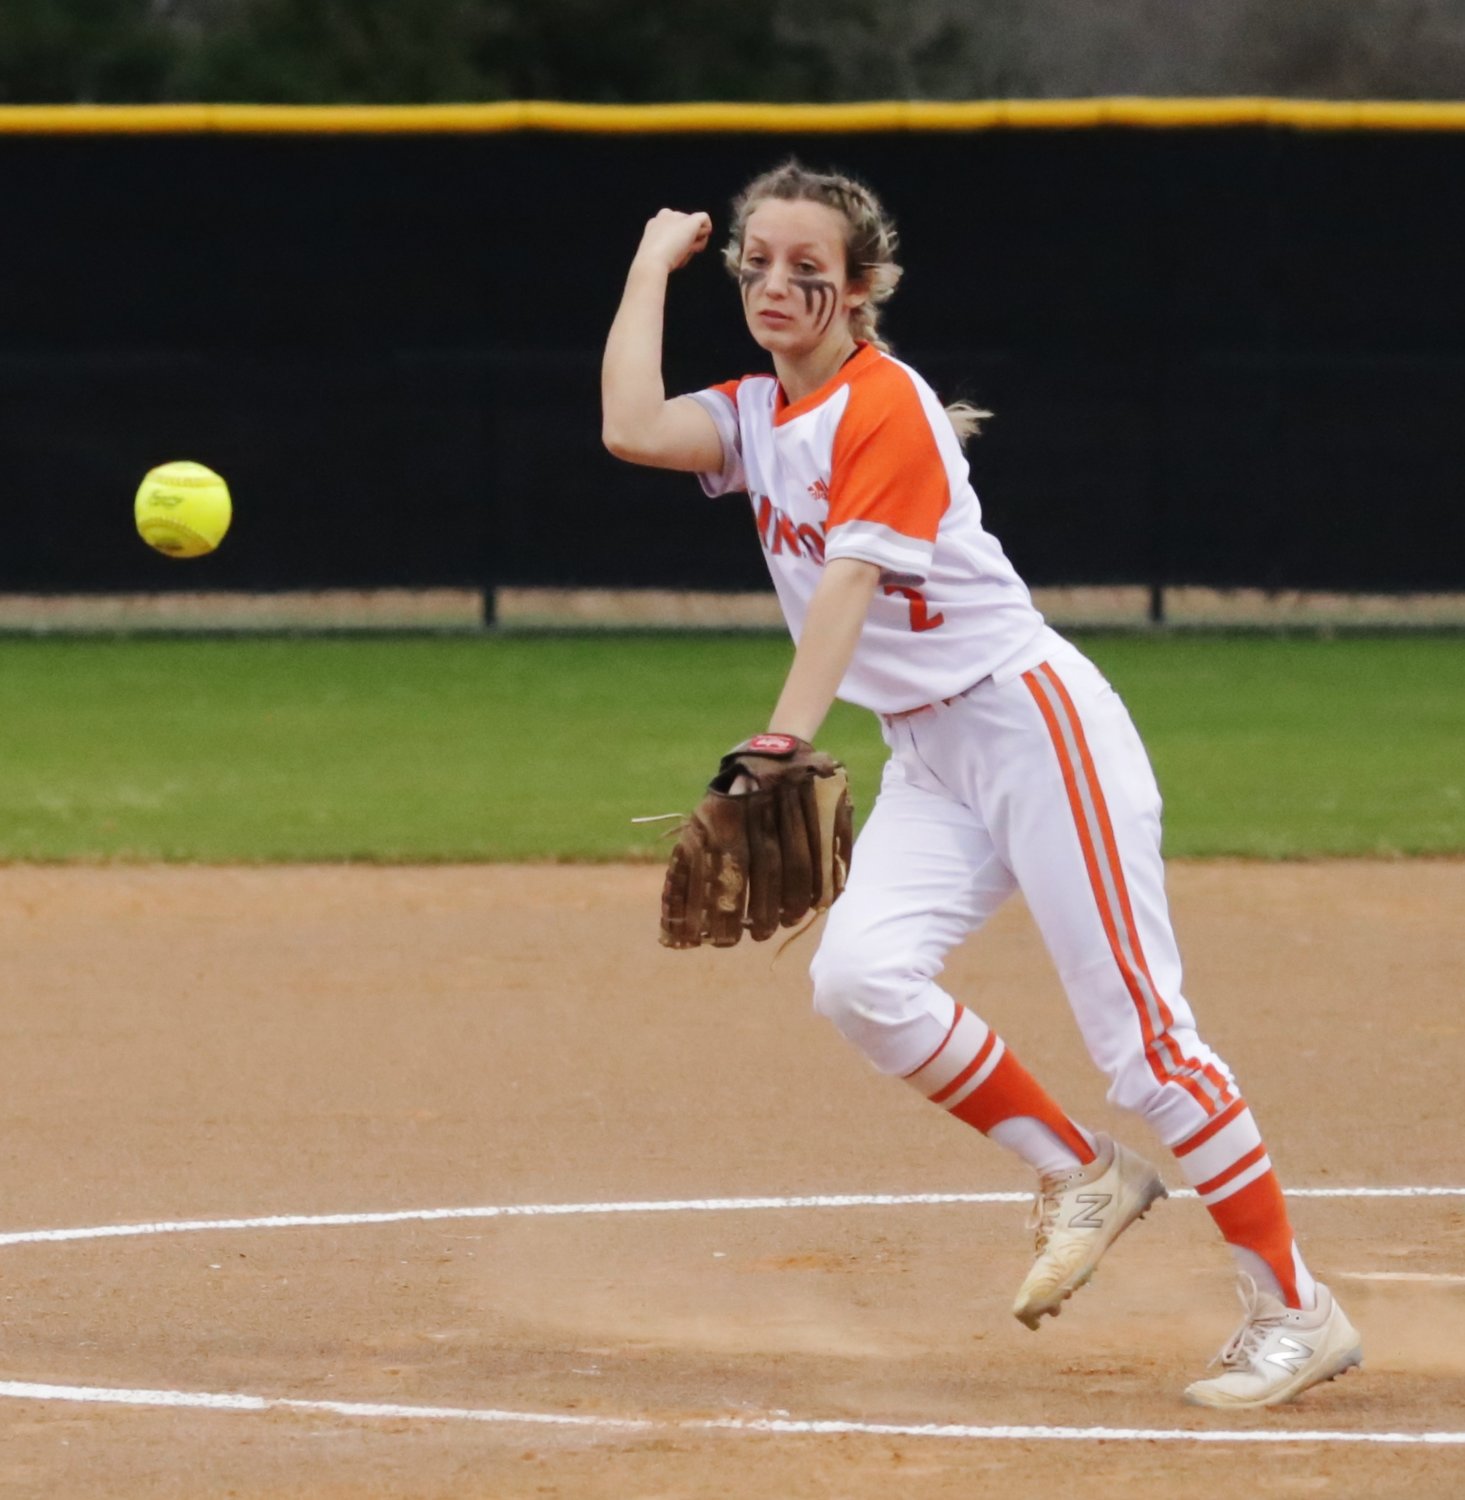 Kayleigh Thompson sends the first pitch of Mineola’s 2021 district campaign to the plate. It was a strike.